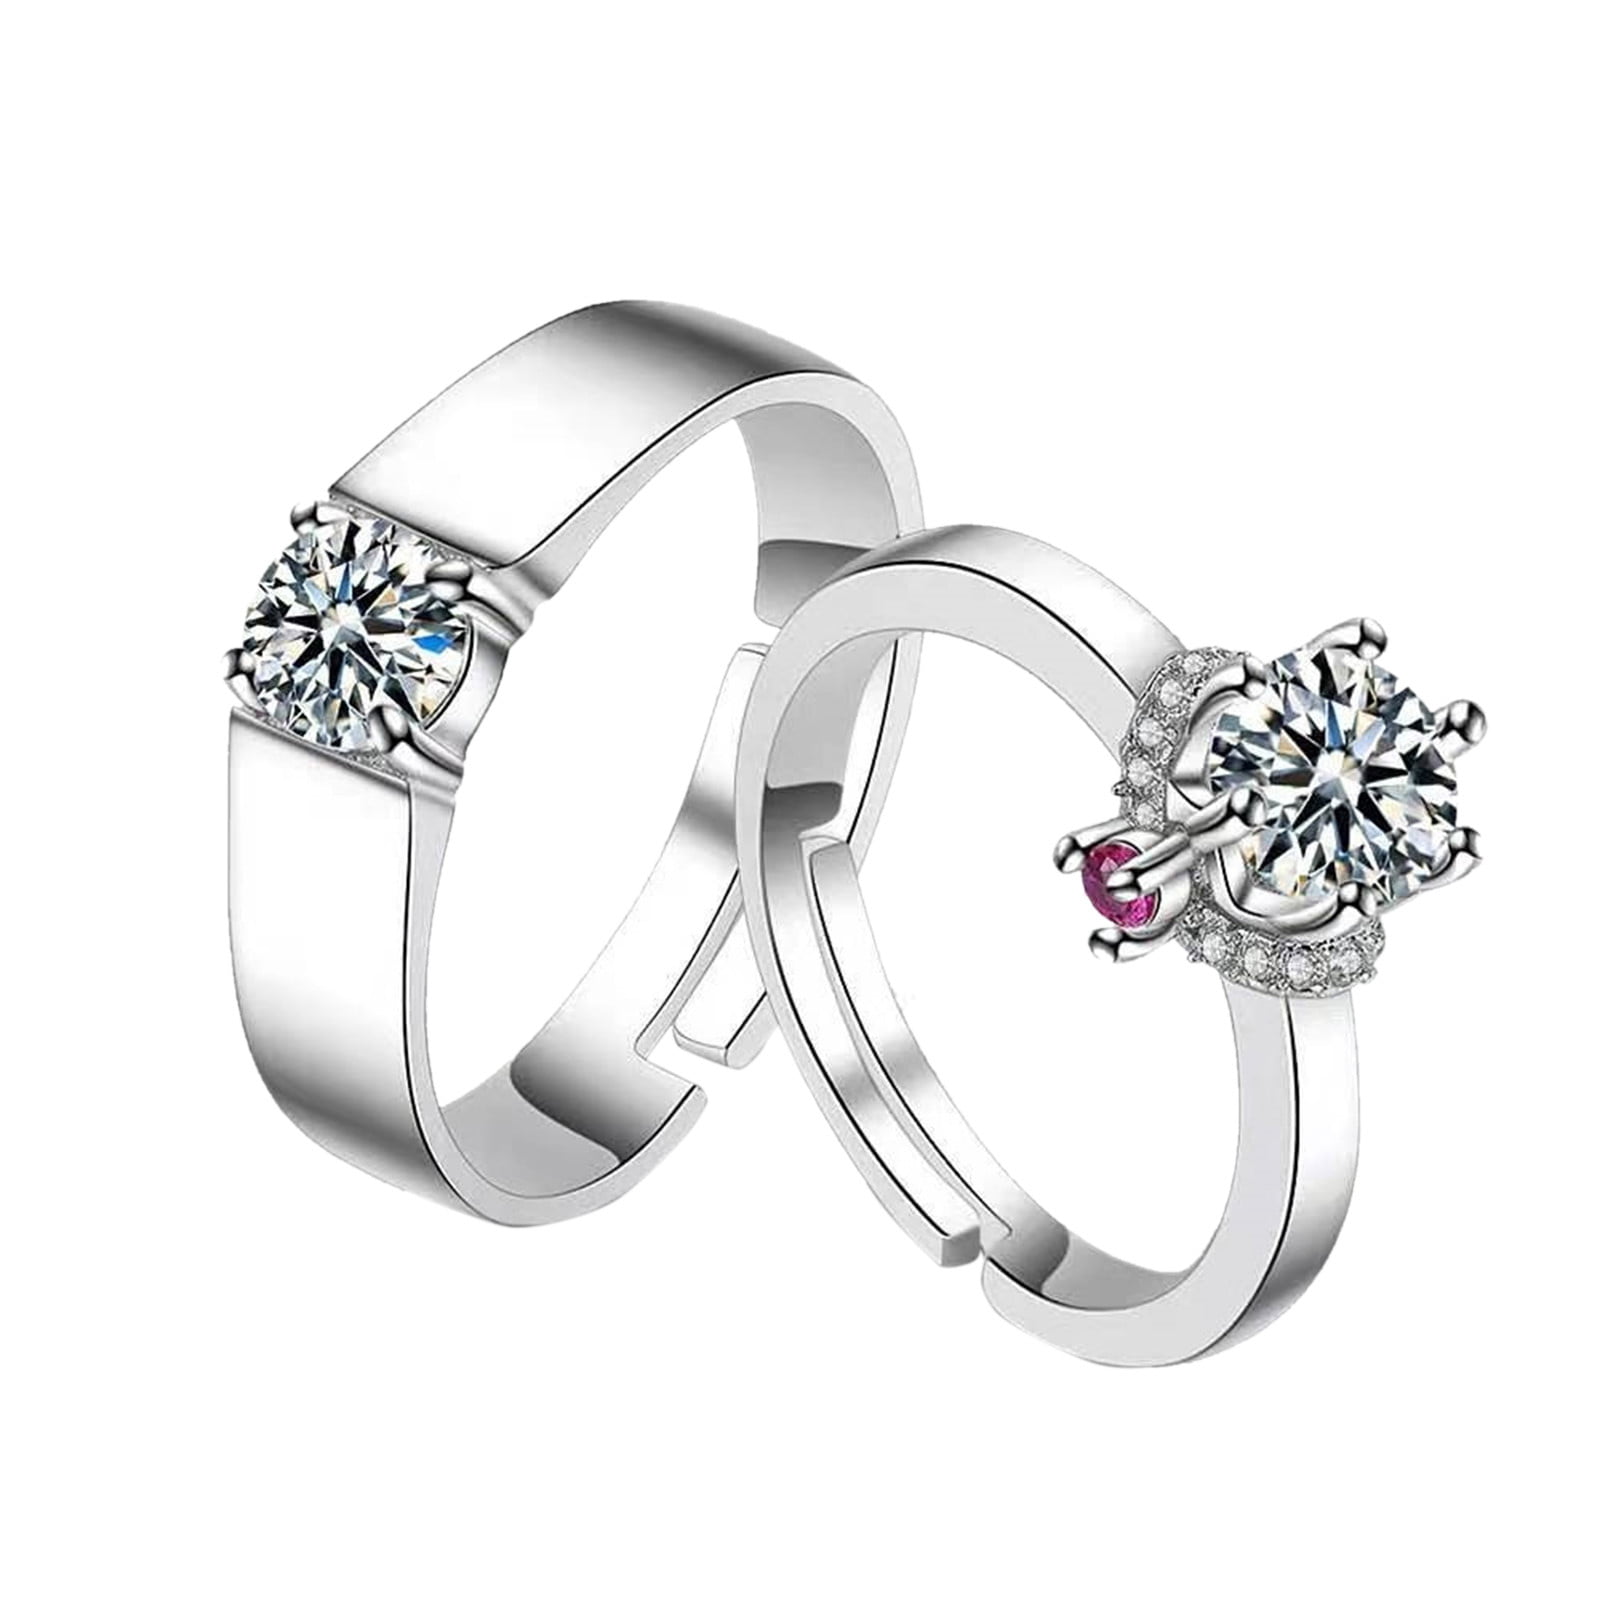 Buy Silver-Toned Rings for Women by Palmonas Online | Ajio.com